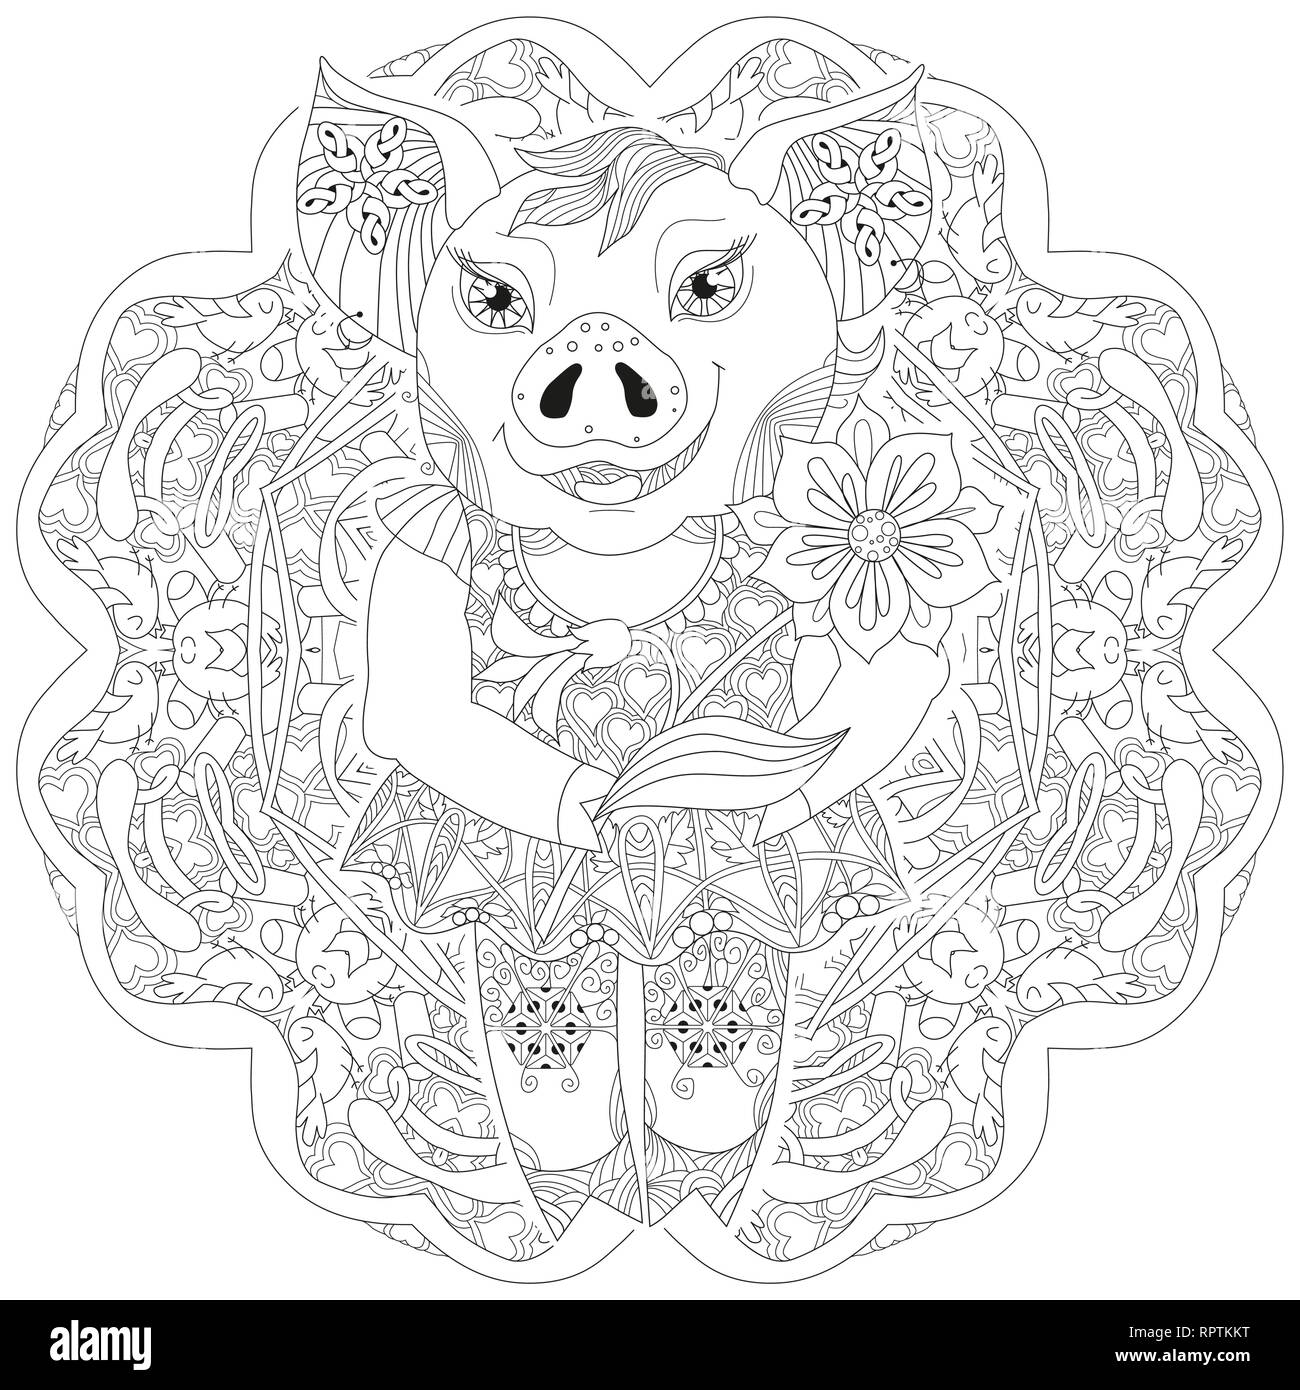 Zentangle illustration with pig. Zen tangle or doodle piglet with mandala. Coloring book domestic animal. Stock Vector